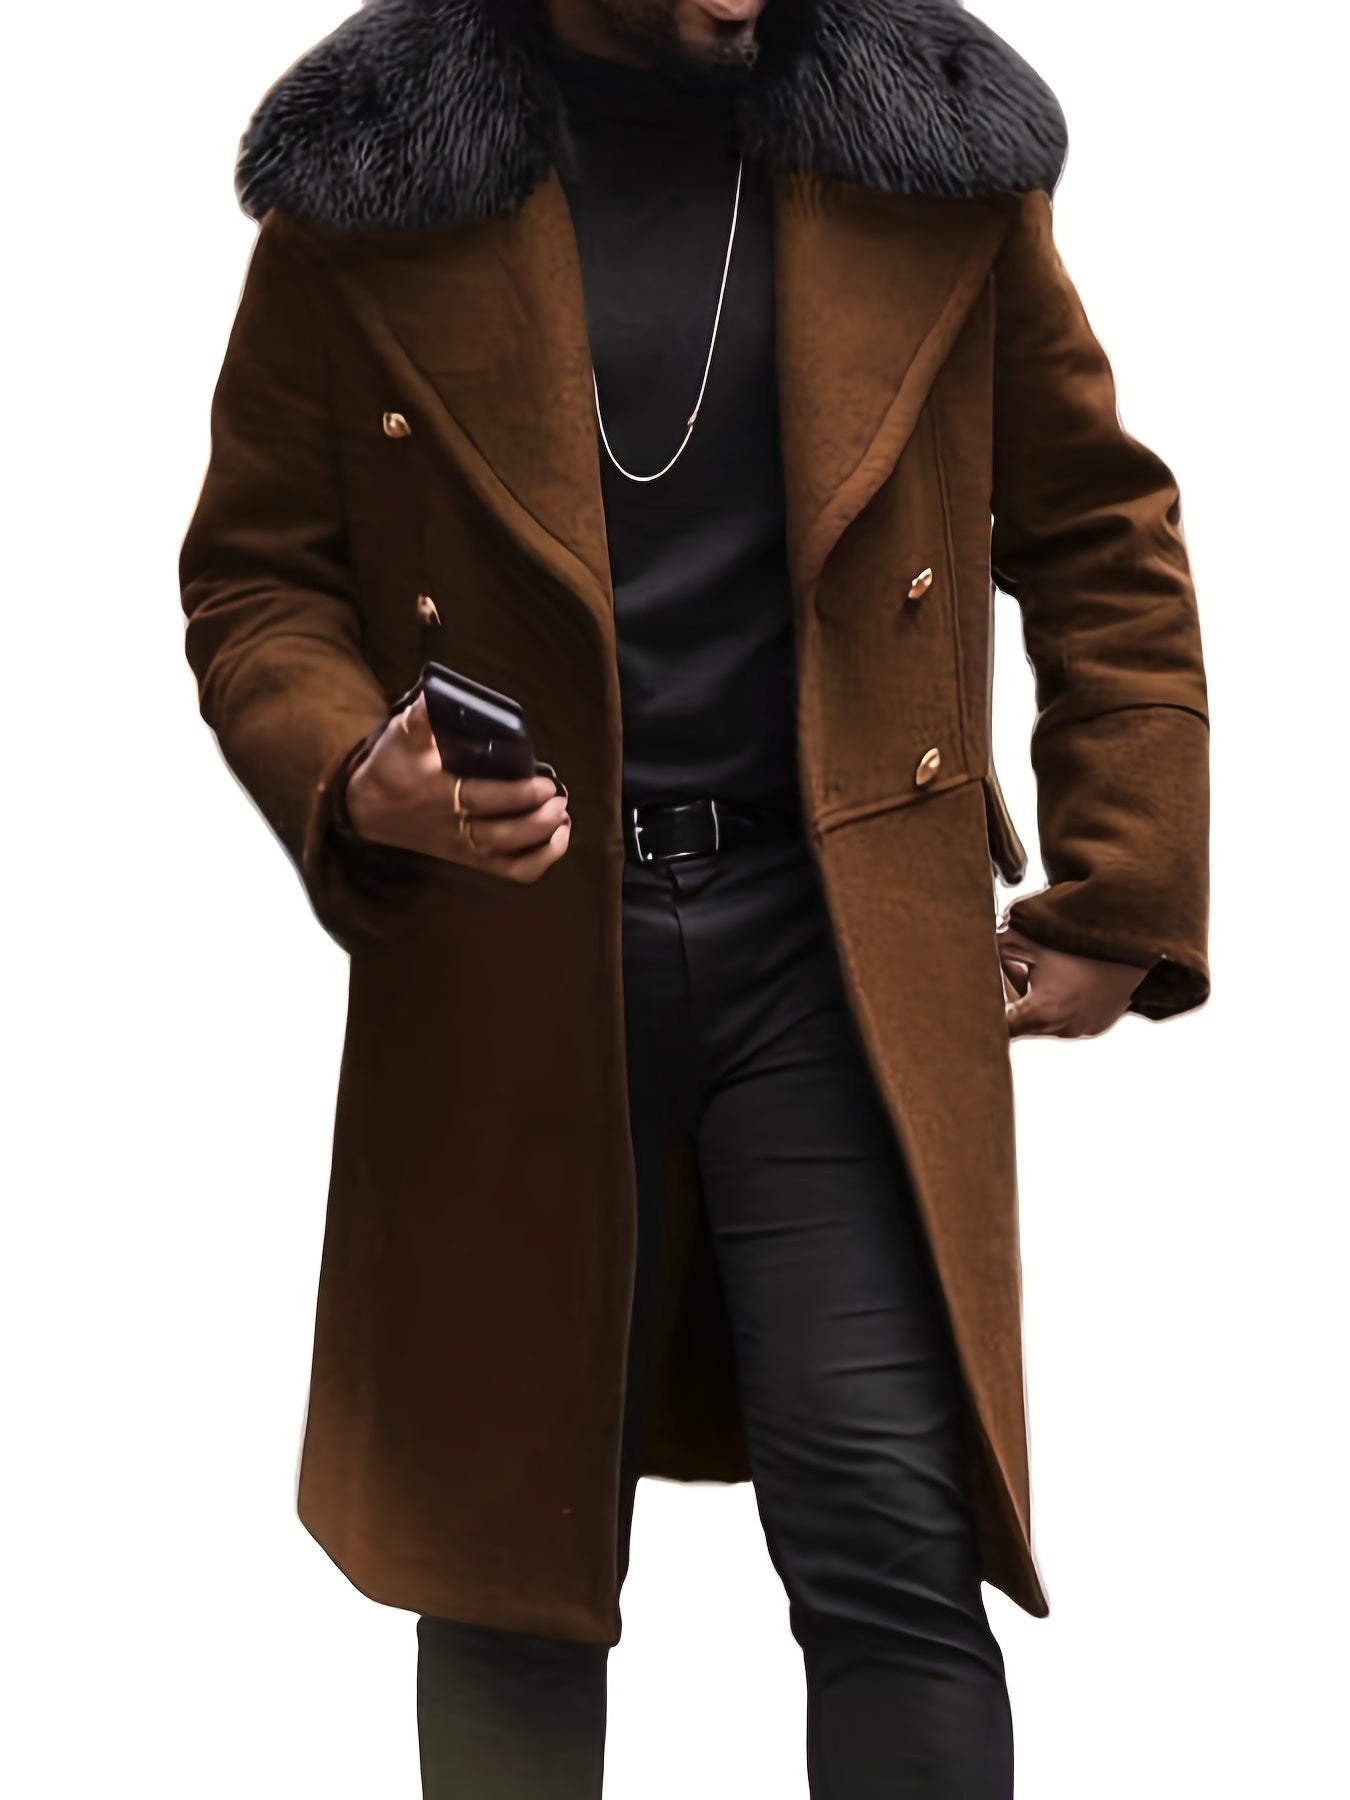 Men's Warm Double Breasted Overcoat, Casual Elegant Faux Woolen Trench ...